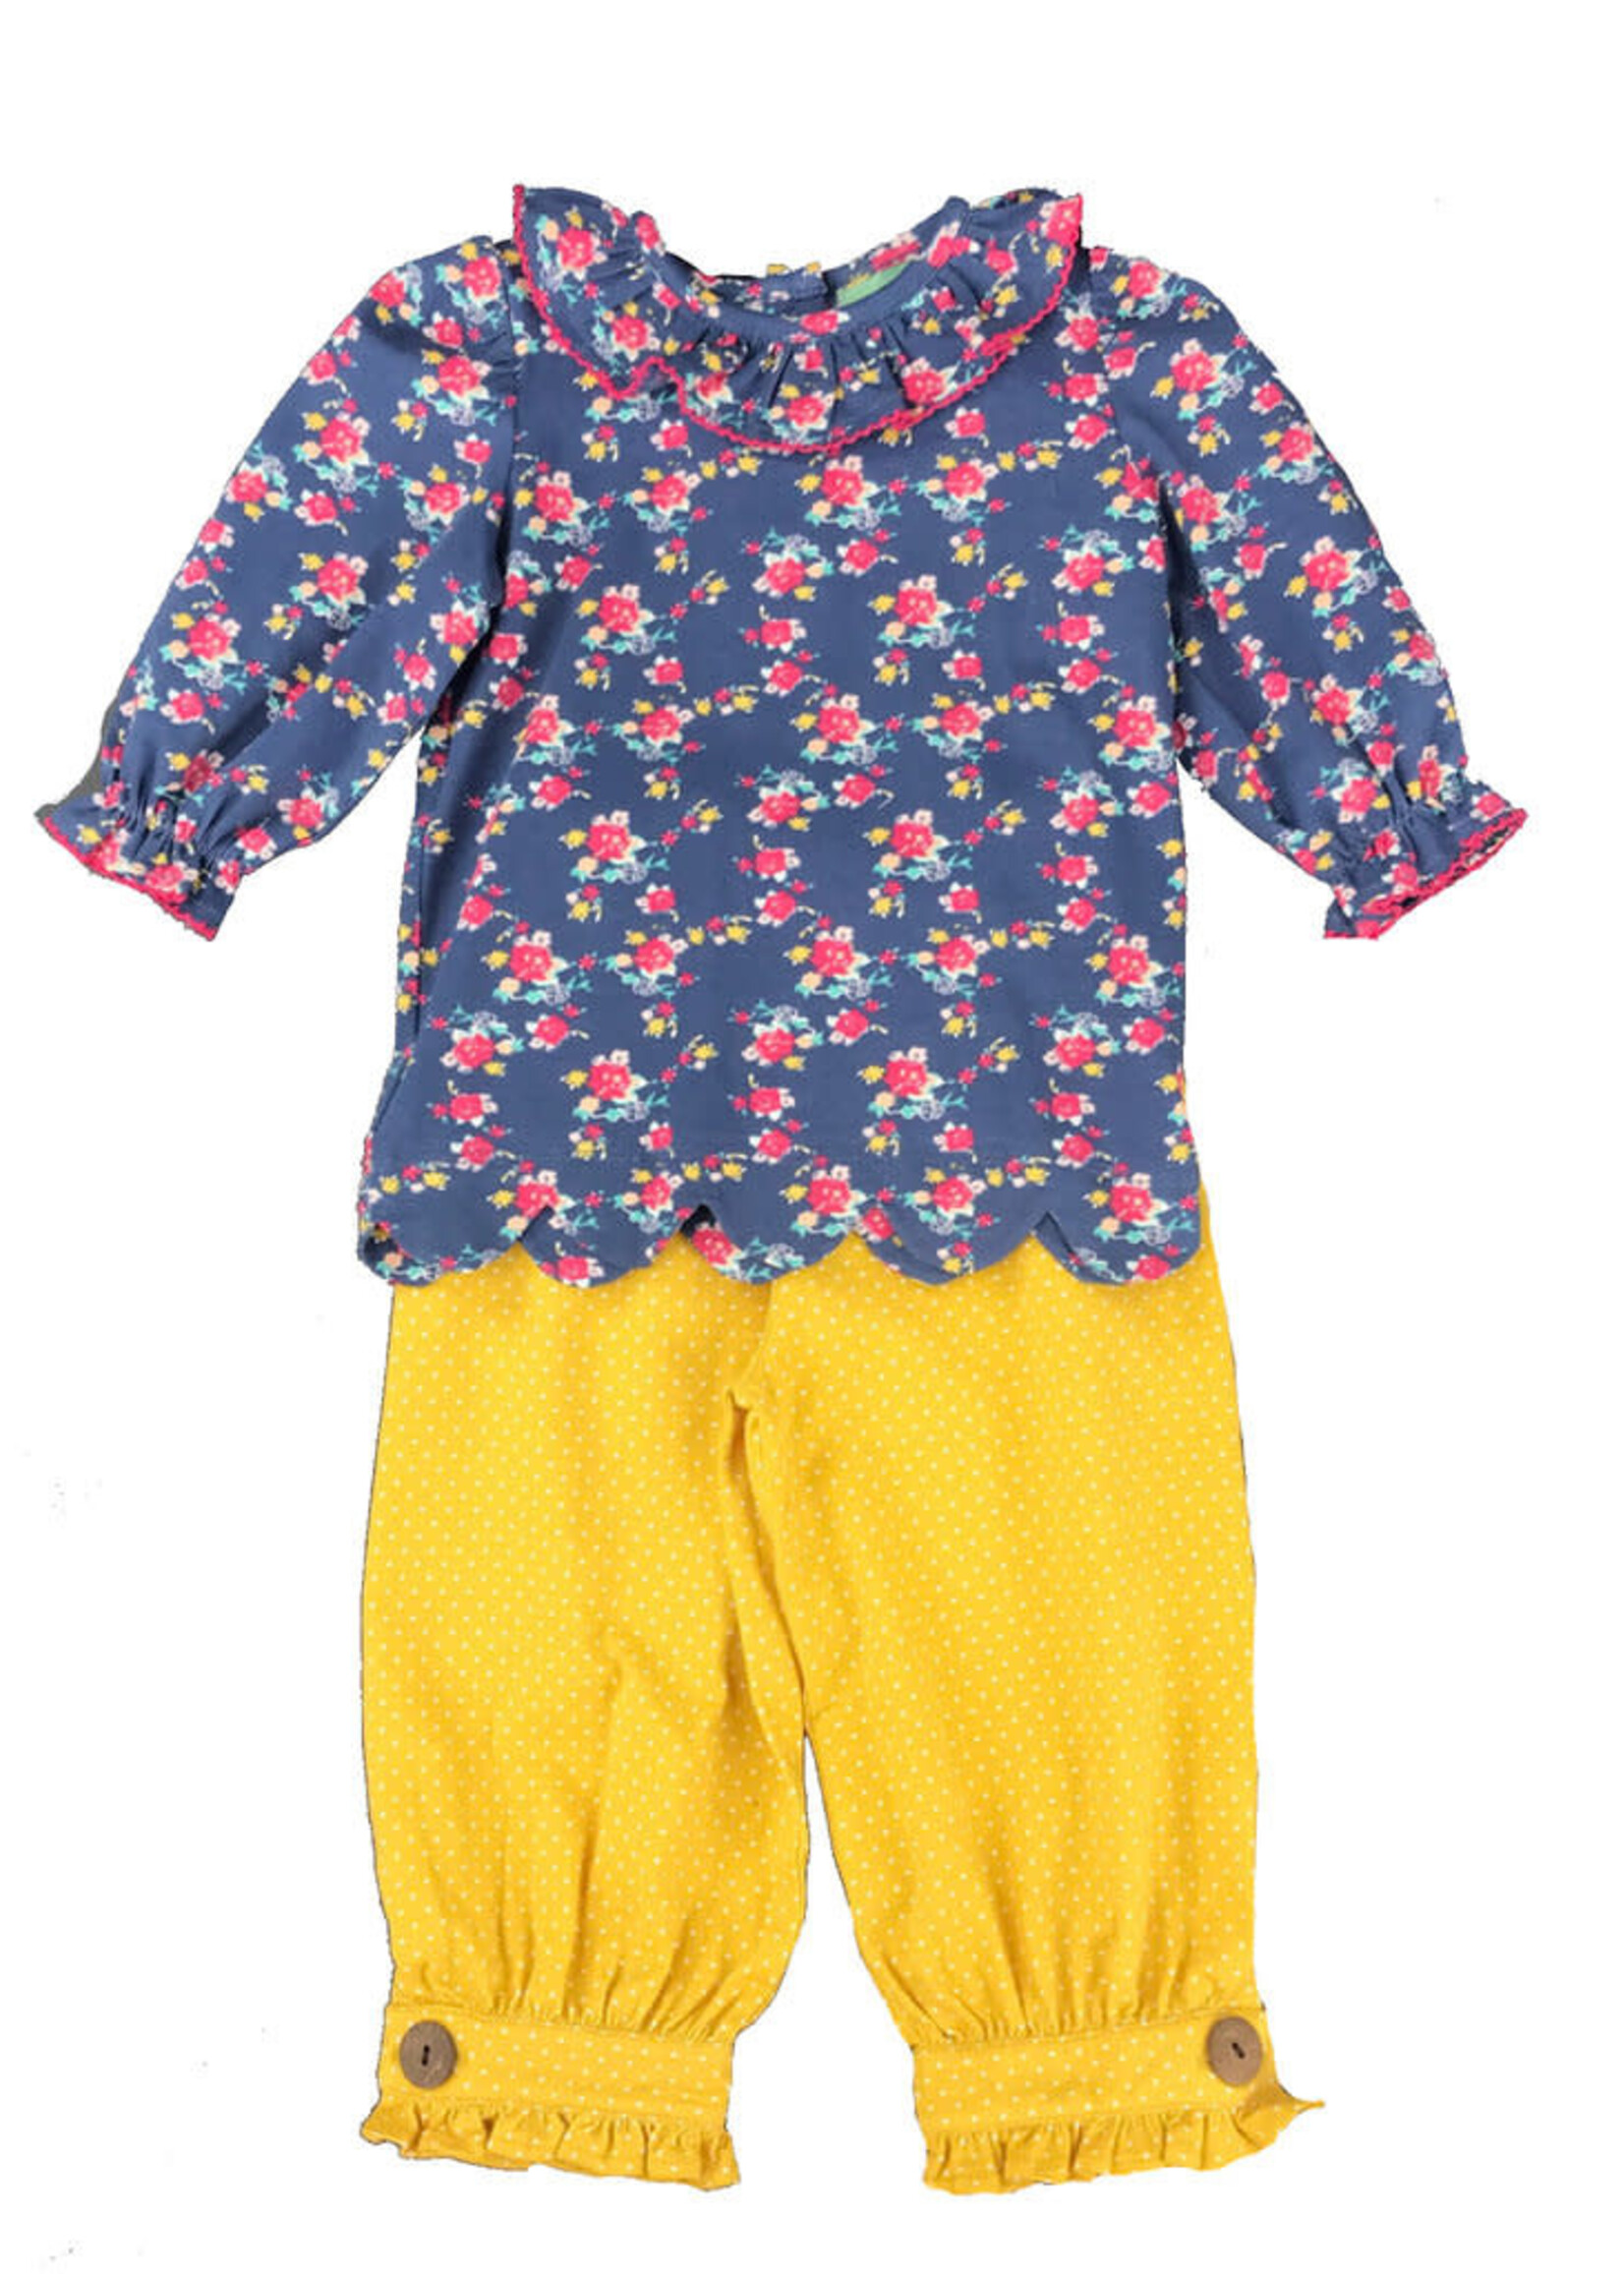 Sage & Lilly Navy Floral Scallop Top w/Mustard Pant Set